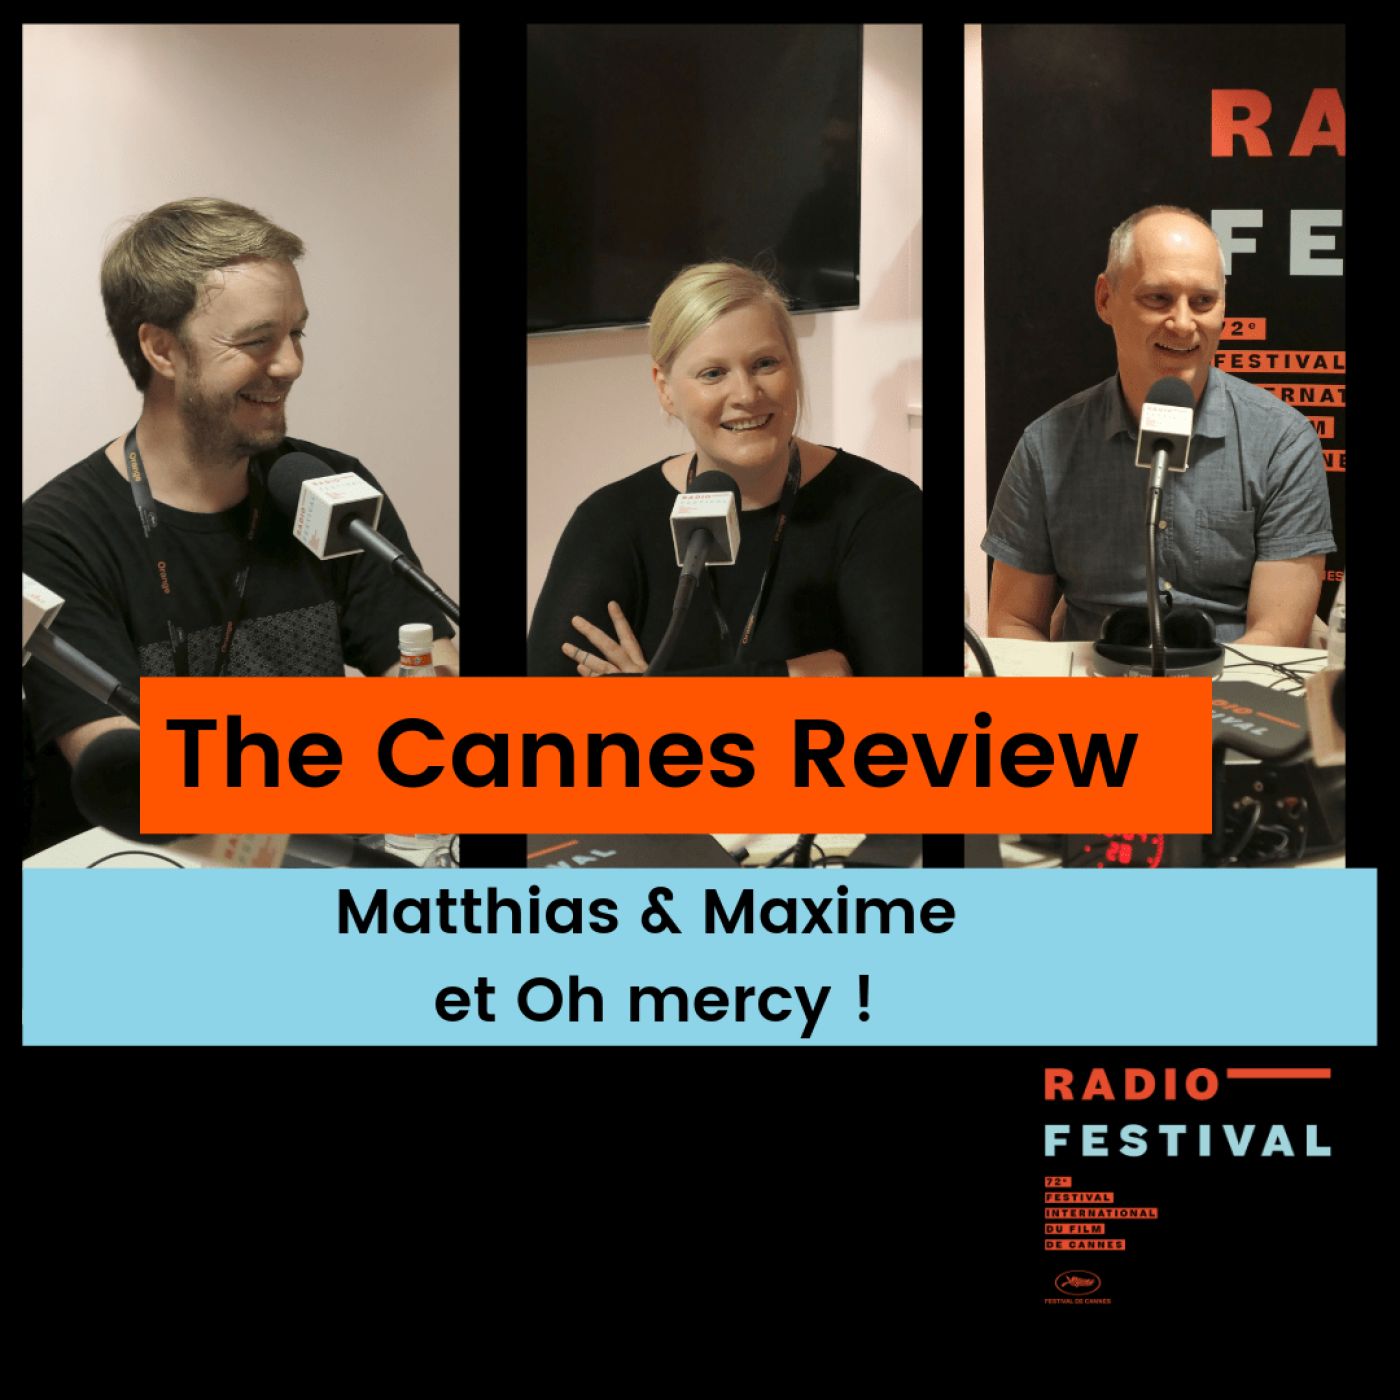 Matthias et Maxime and Oh Mercy - 23rd May 2019